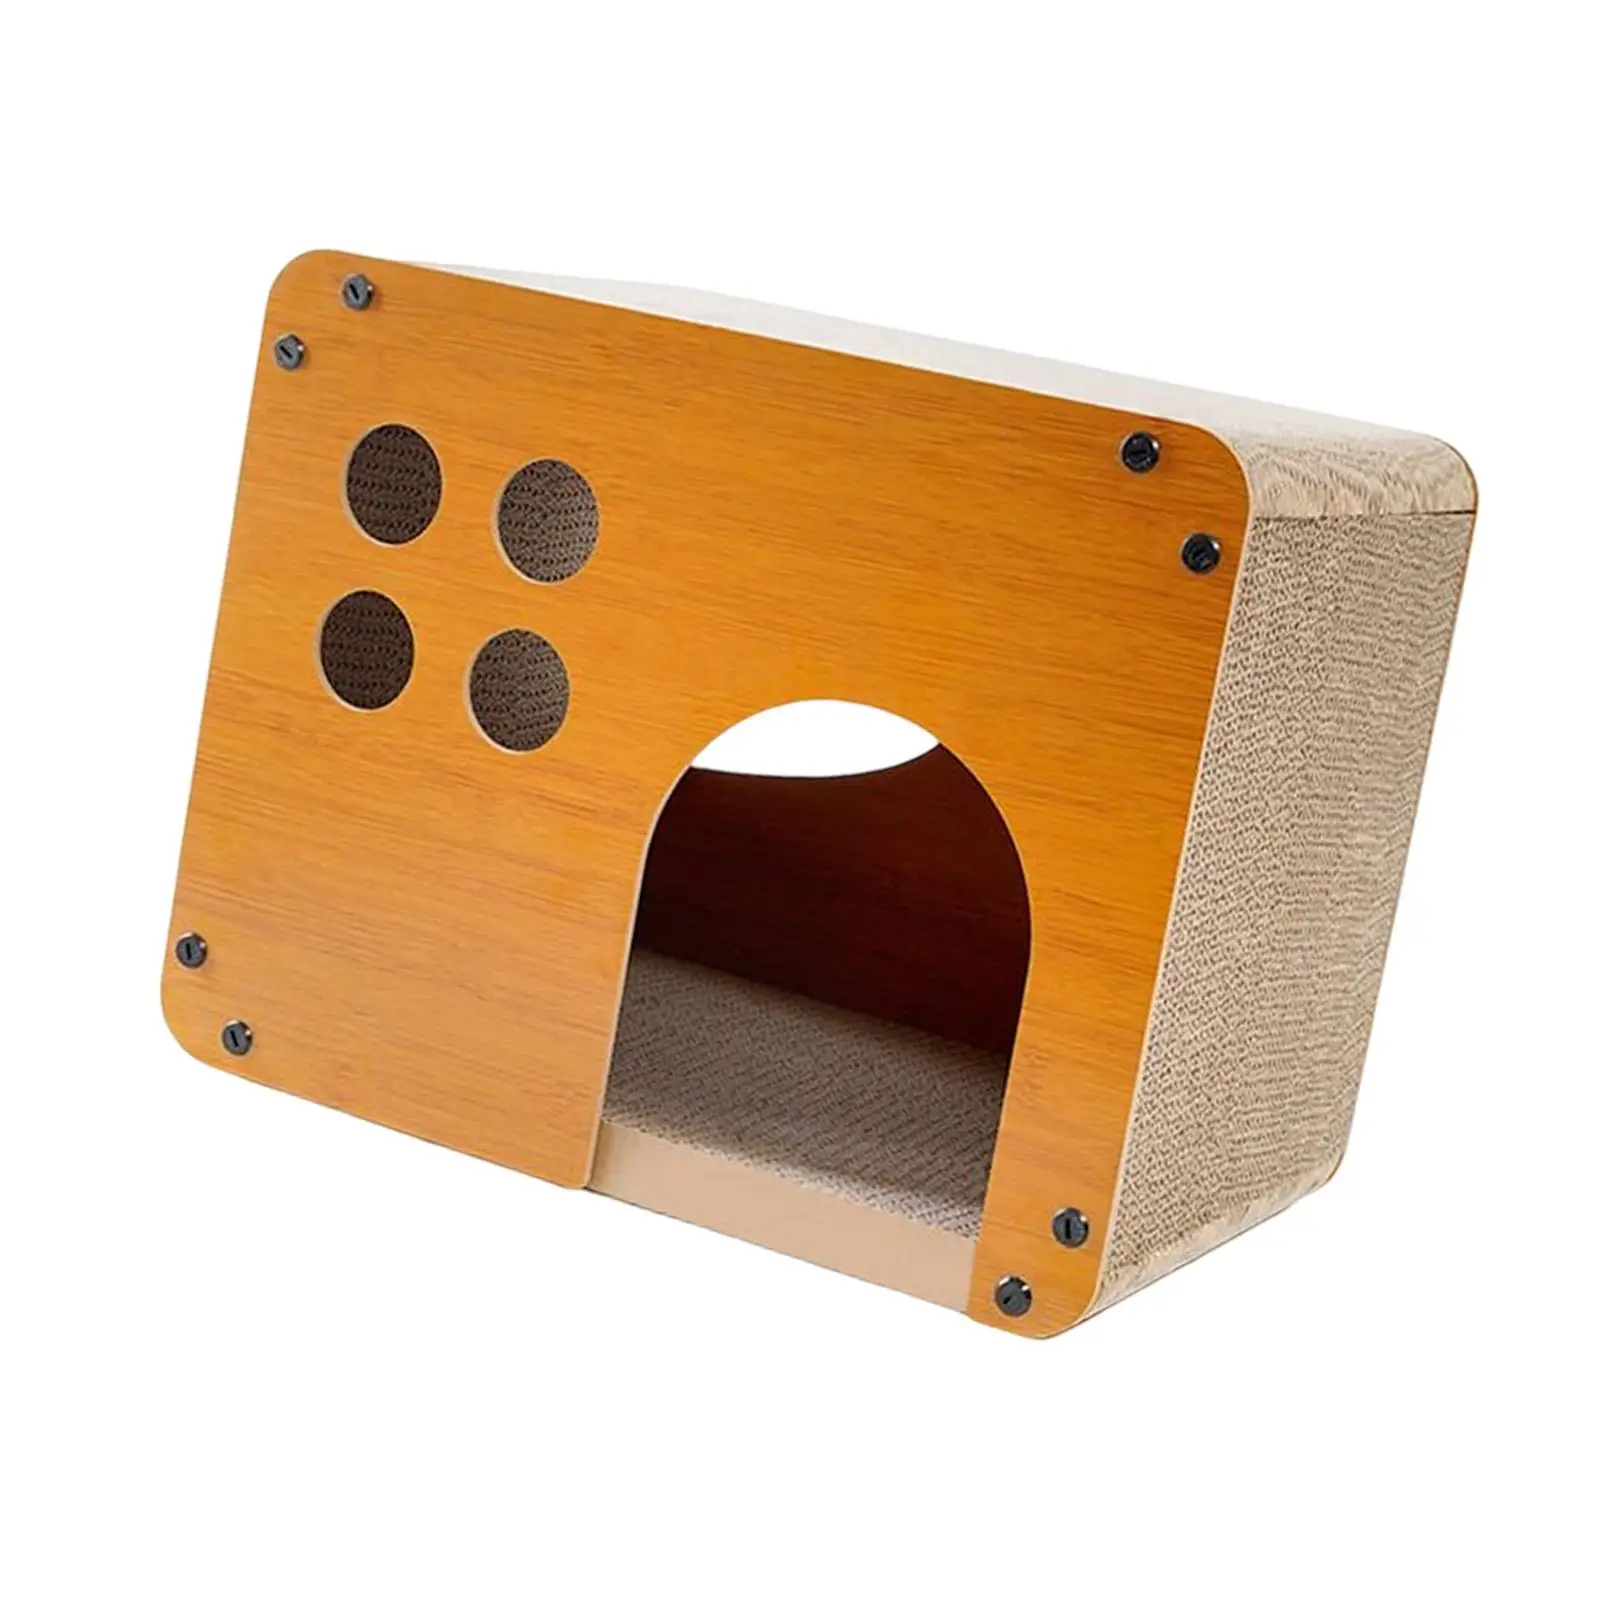 Pets Cave Corrugated Cardboard Breathable Compact Household Wooden Cat Dog House Sleeping Bed Kennel for Small Dogs Kitten Puppy